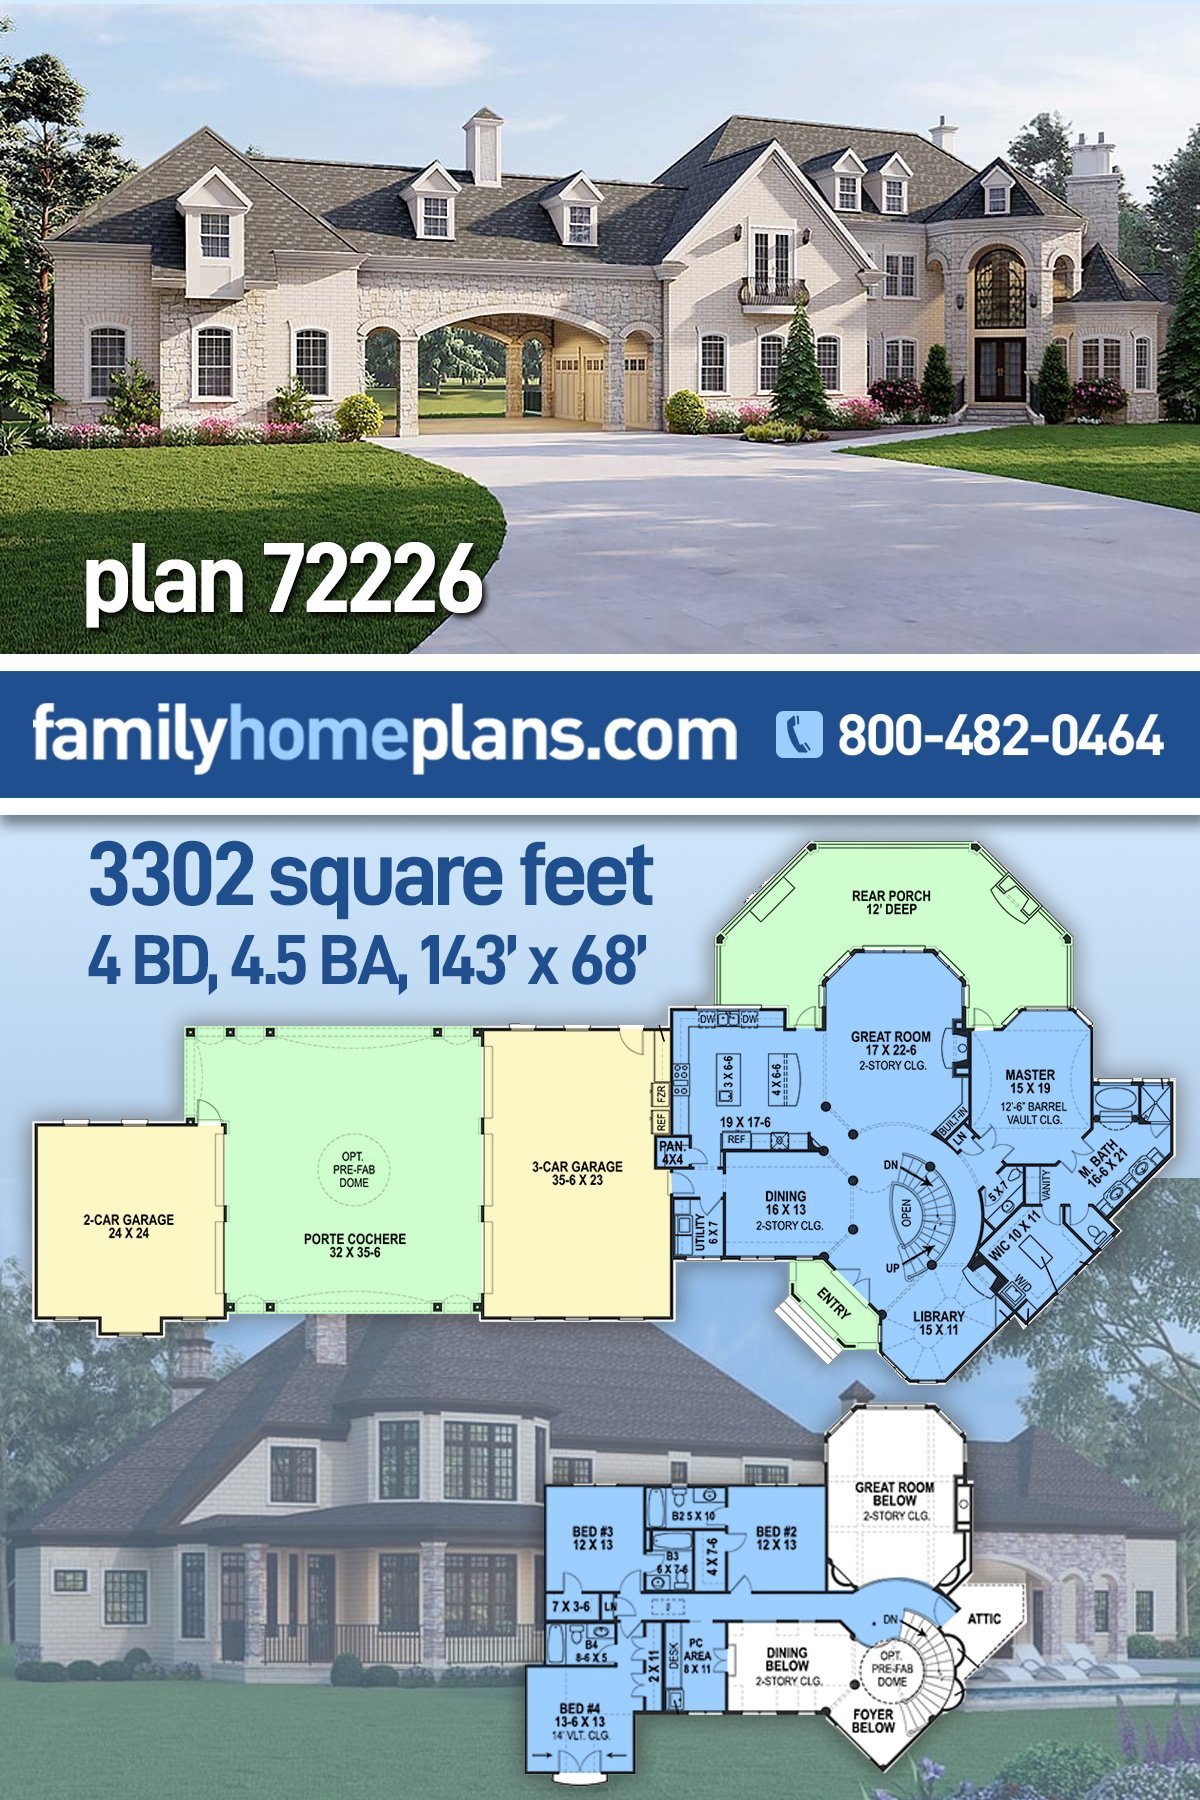 European, French Country House Plan 72226 with 5 Bed, 5 Bath, 5 Car Garage